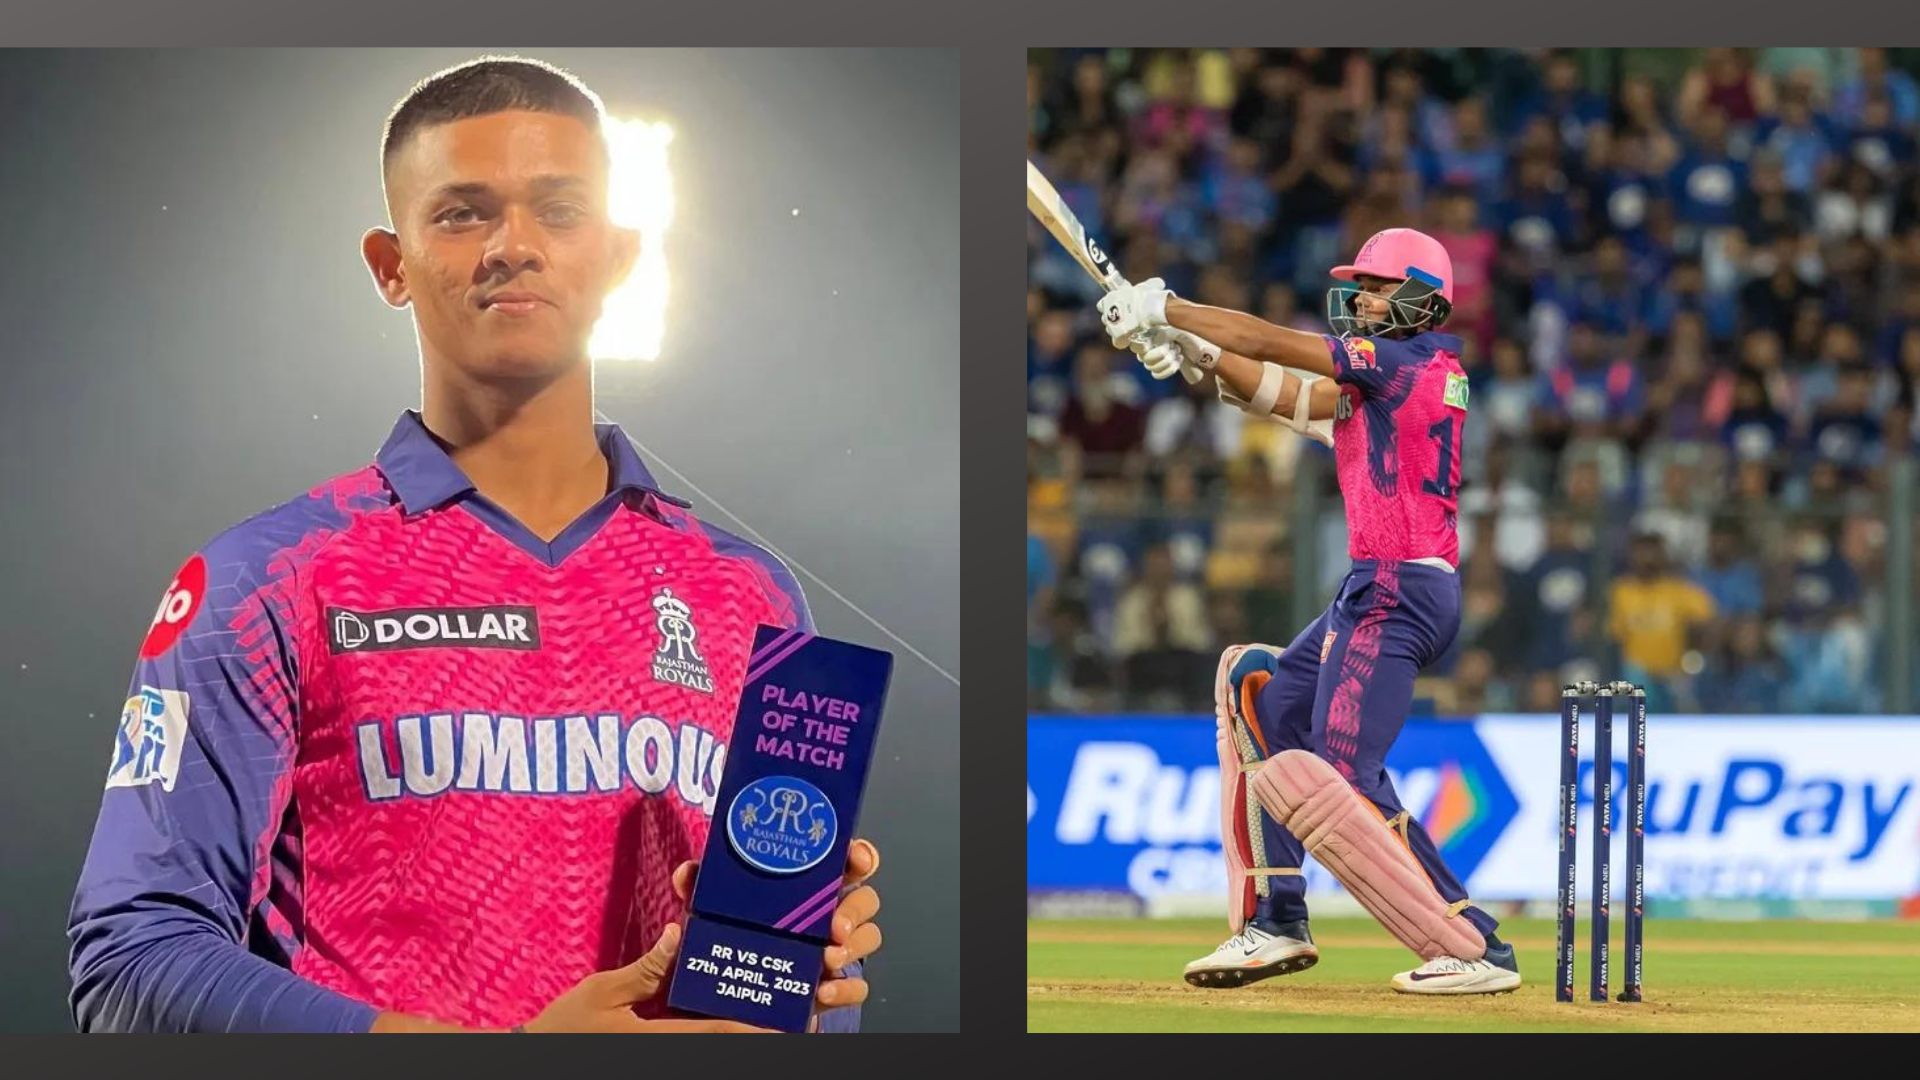 yashasvi jaiswal player of the match and he is hitting sixes